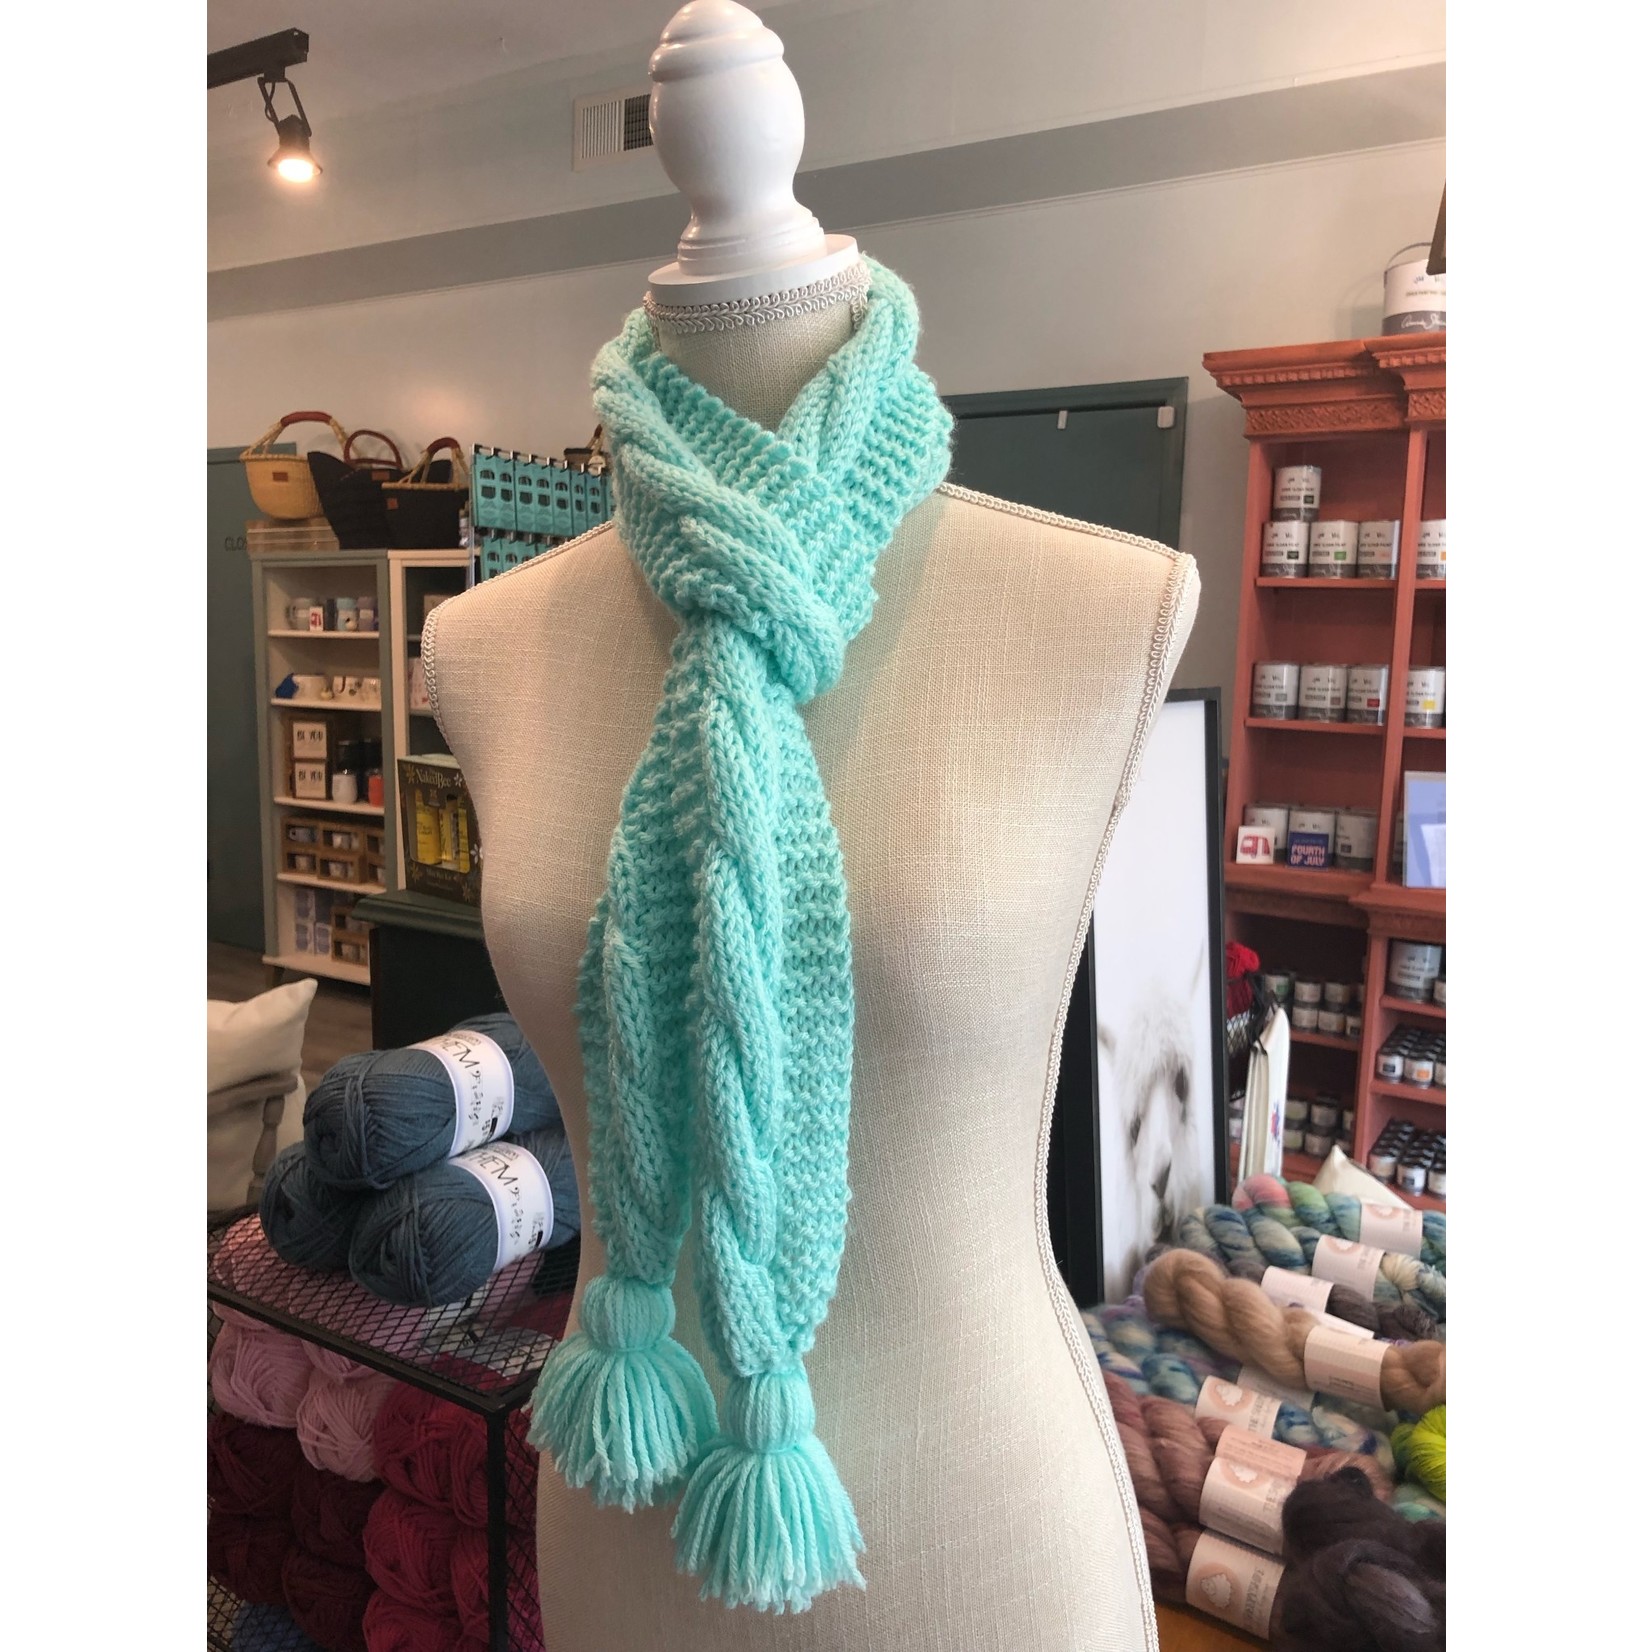 KKN April Intro to Knitting – Learn to Make a Cable Scarf – Apr 5th, 12th, 19th, May 3rd 6-8pm